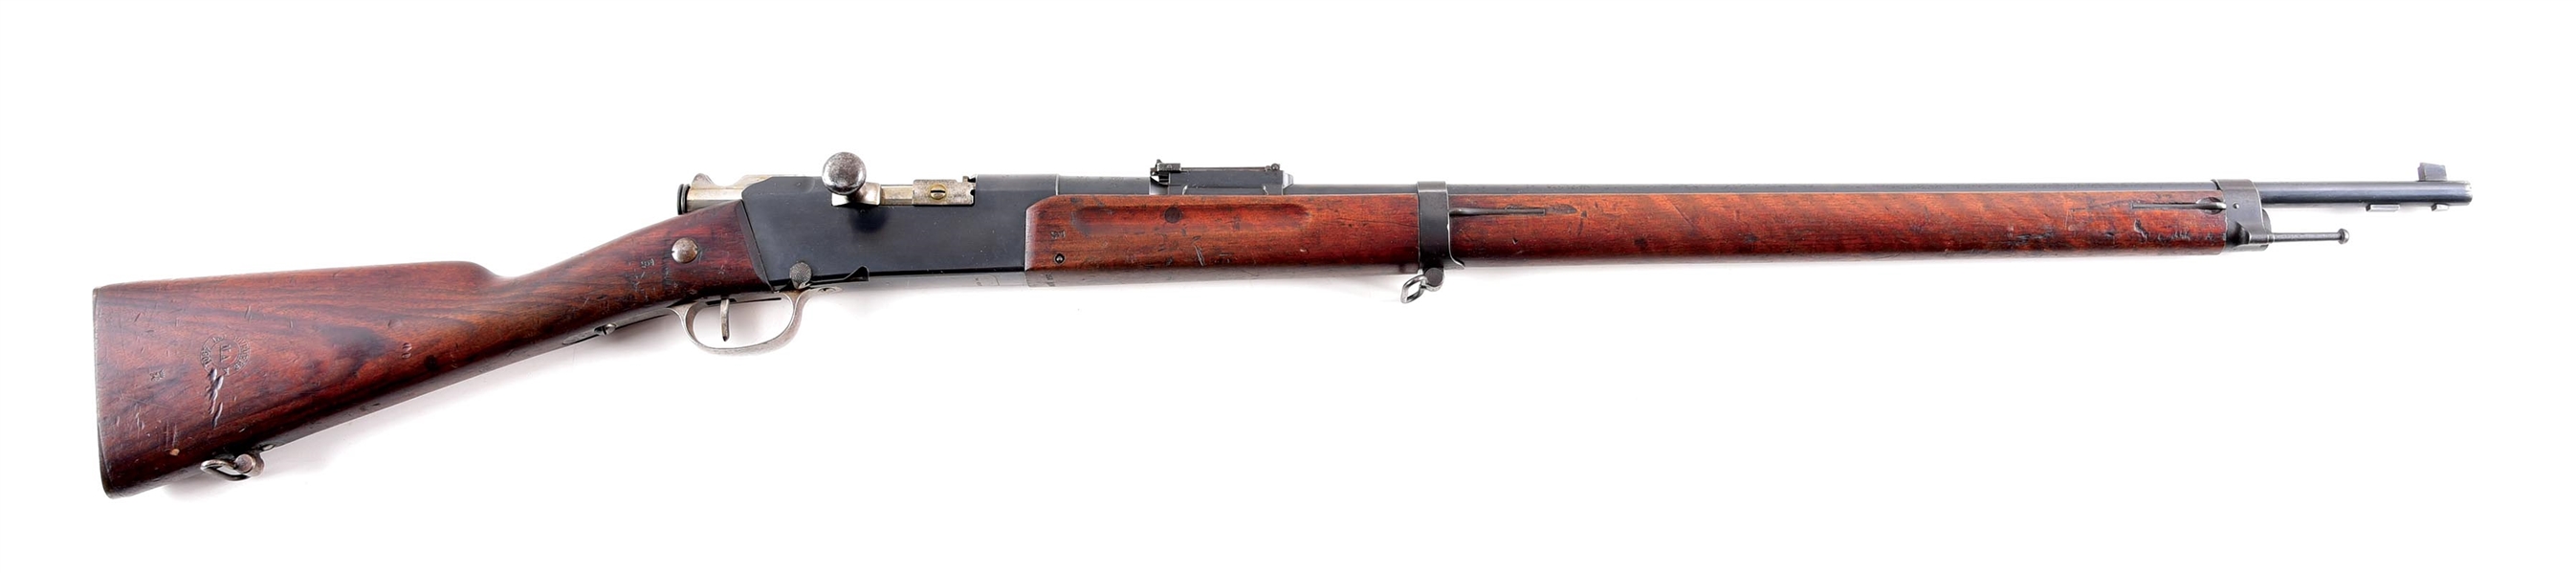 (C) VERY NICE PRE-WWI ST. ETIENNE MLE 1886 M93 BOLT ACTION RIFLE.